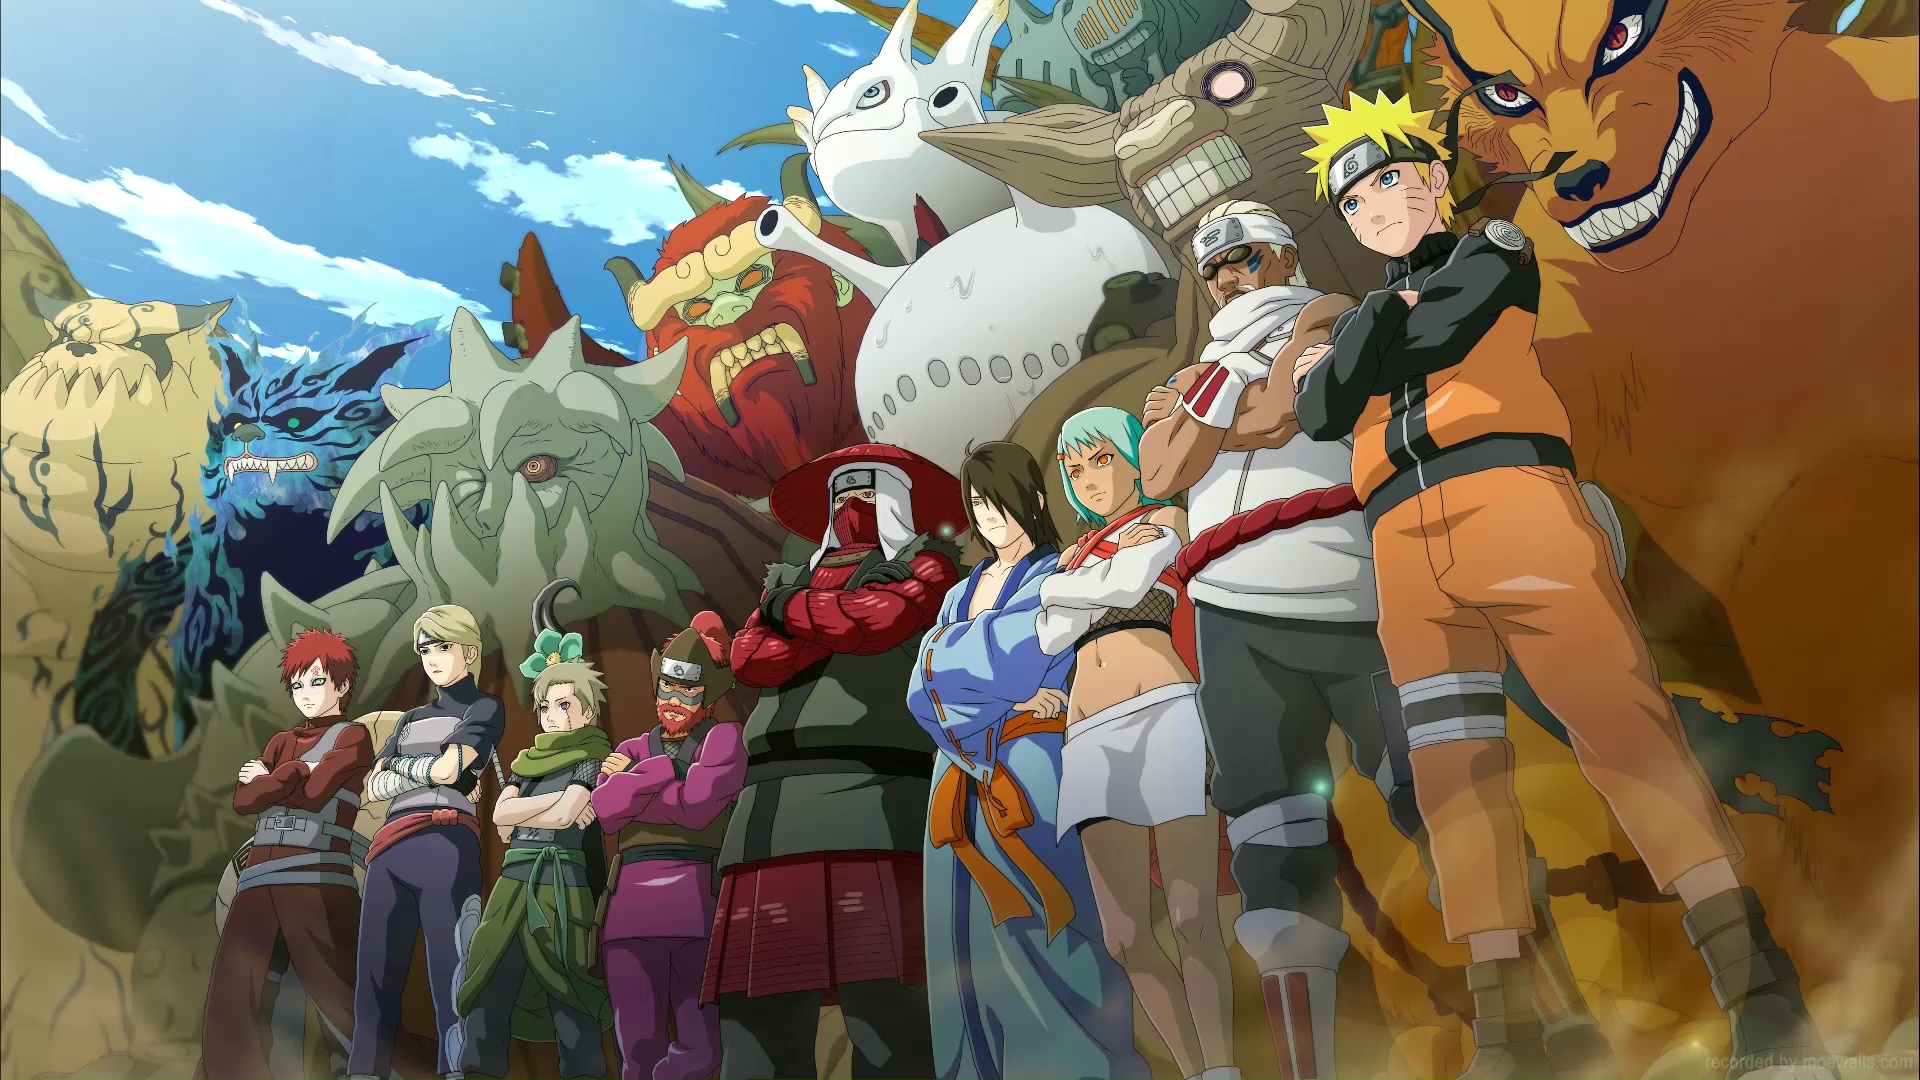 Naruto shippūden hd wallpapers, hd images, backgrounds